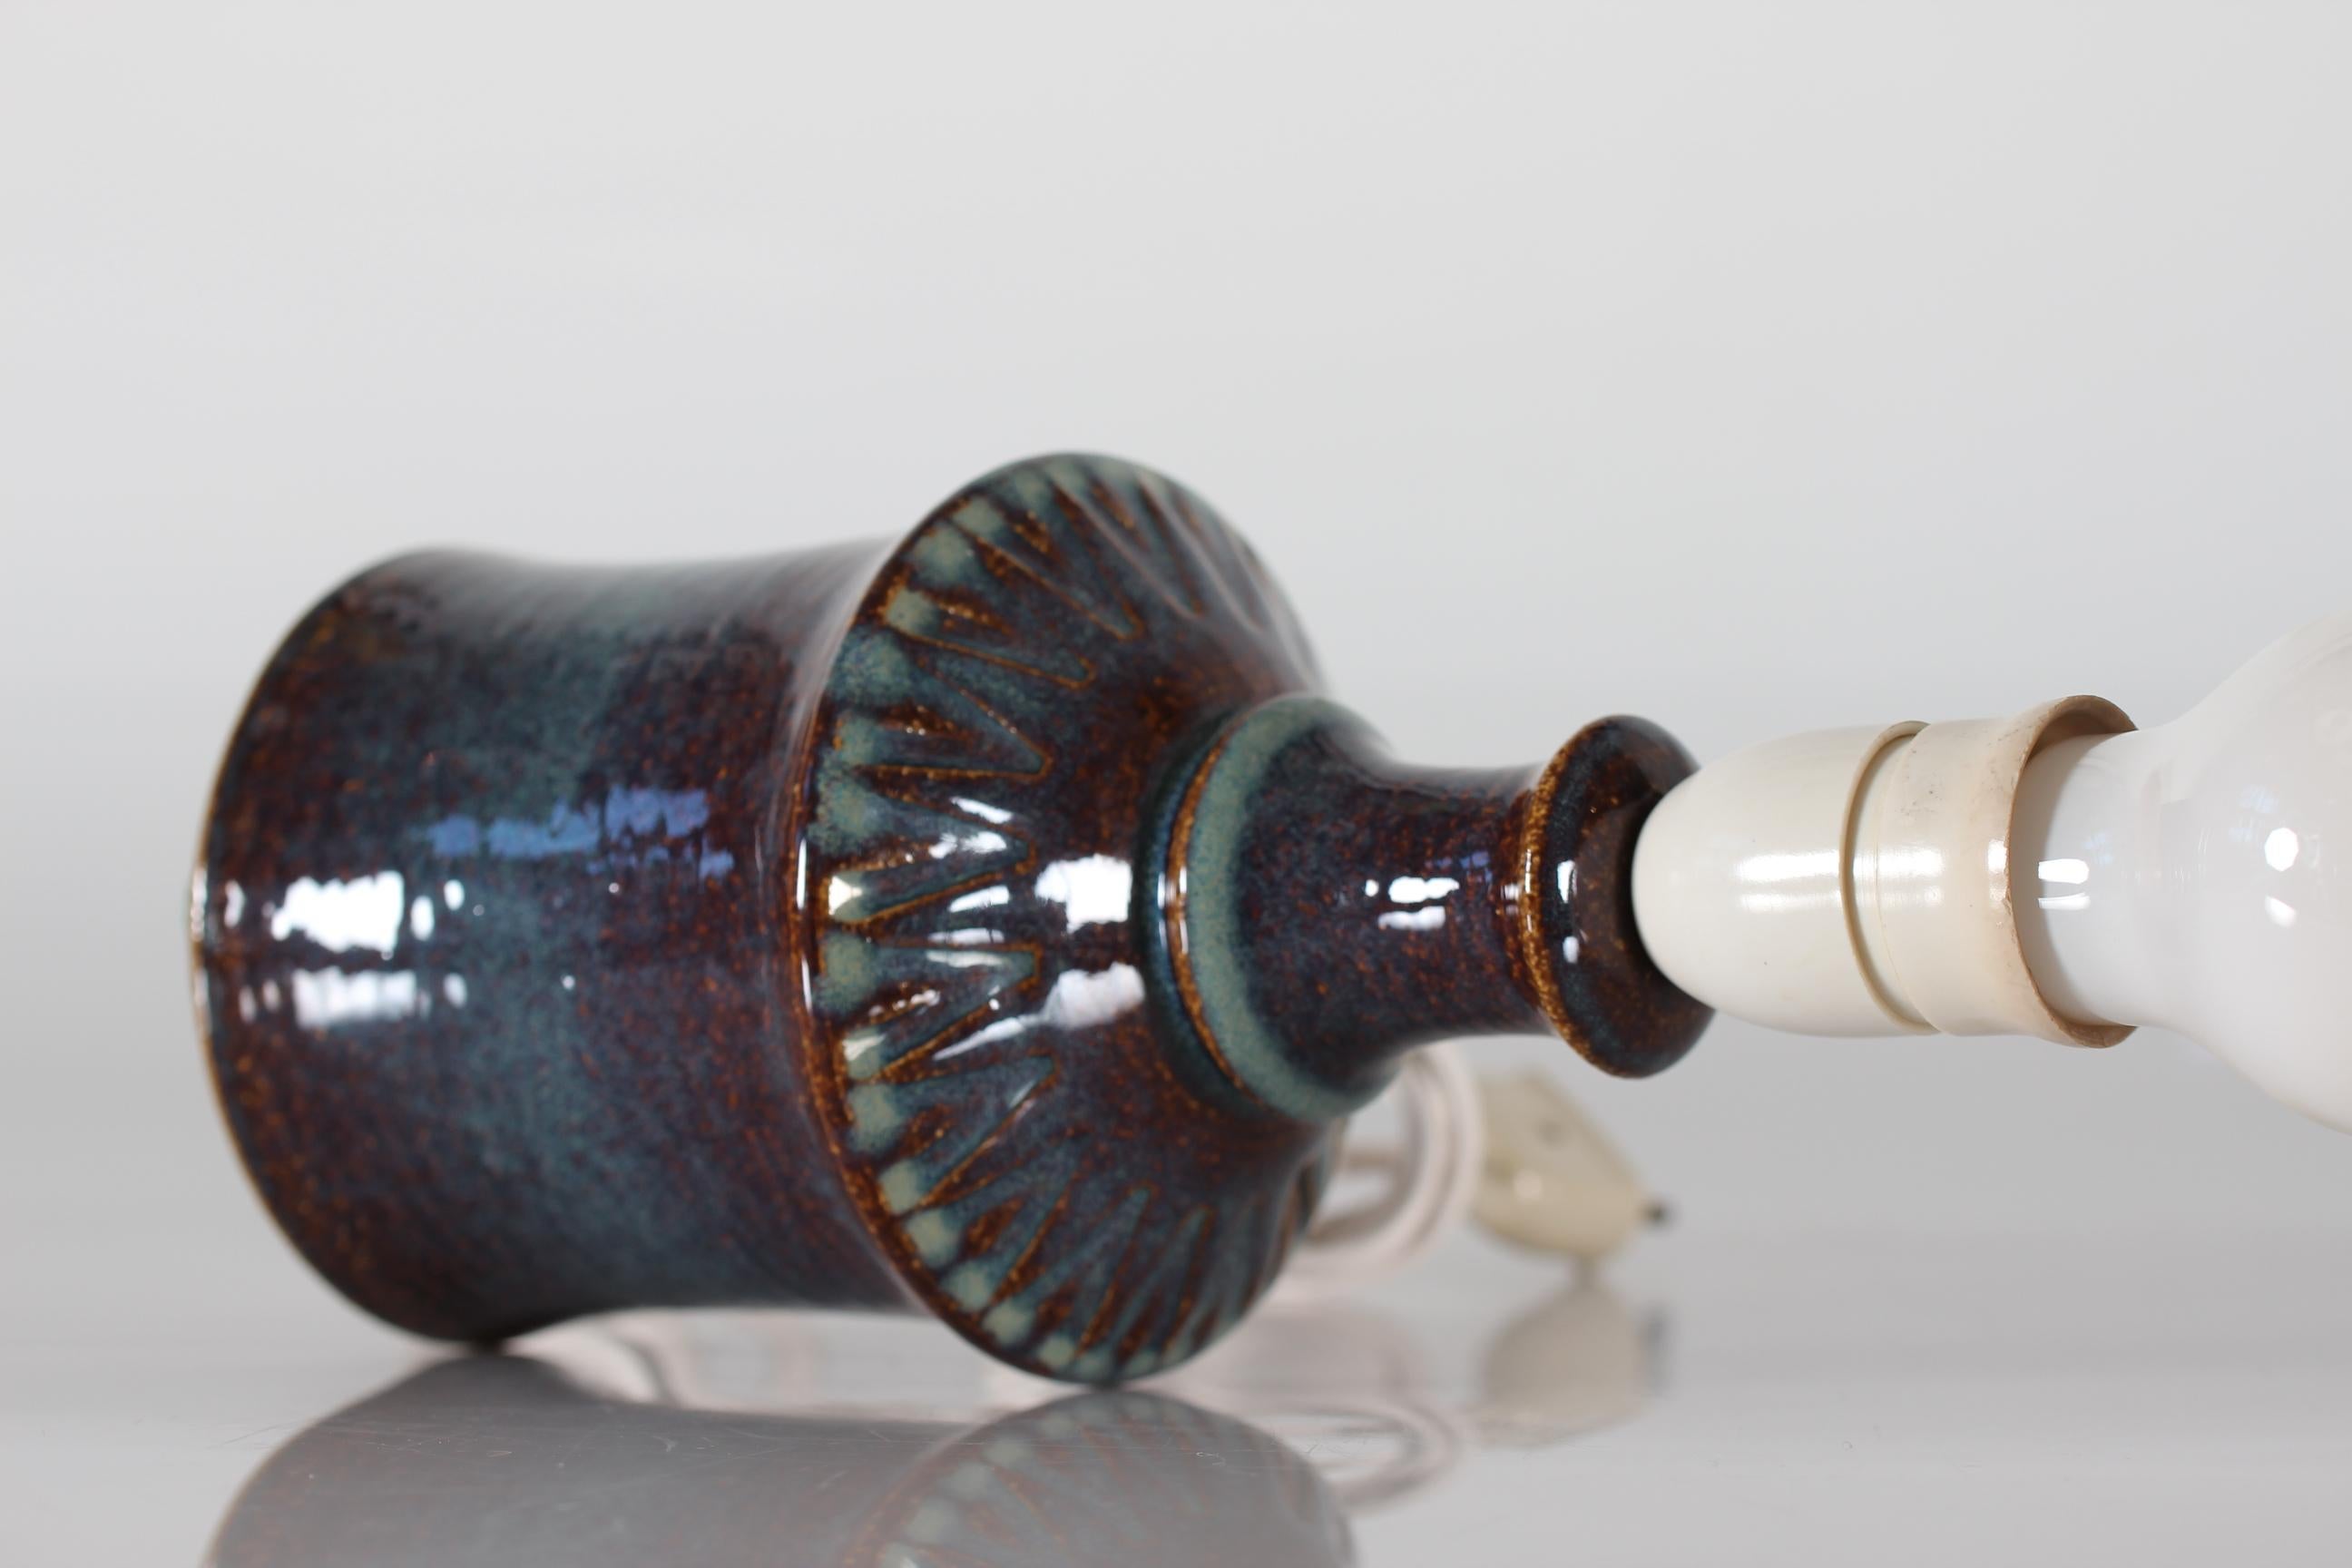 Danish Søholm Ceramic Table Lamp with Blue + Turquoise Glaze + New Shade, 1960s In Good Condition For Sale In Aarhus C, DK